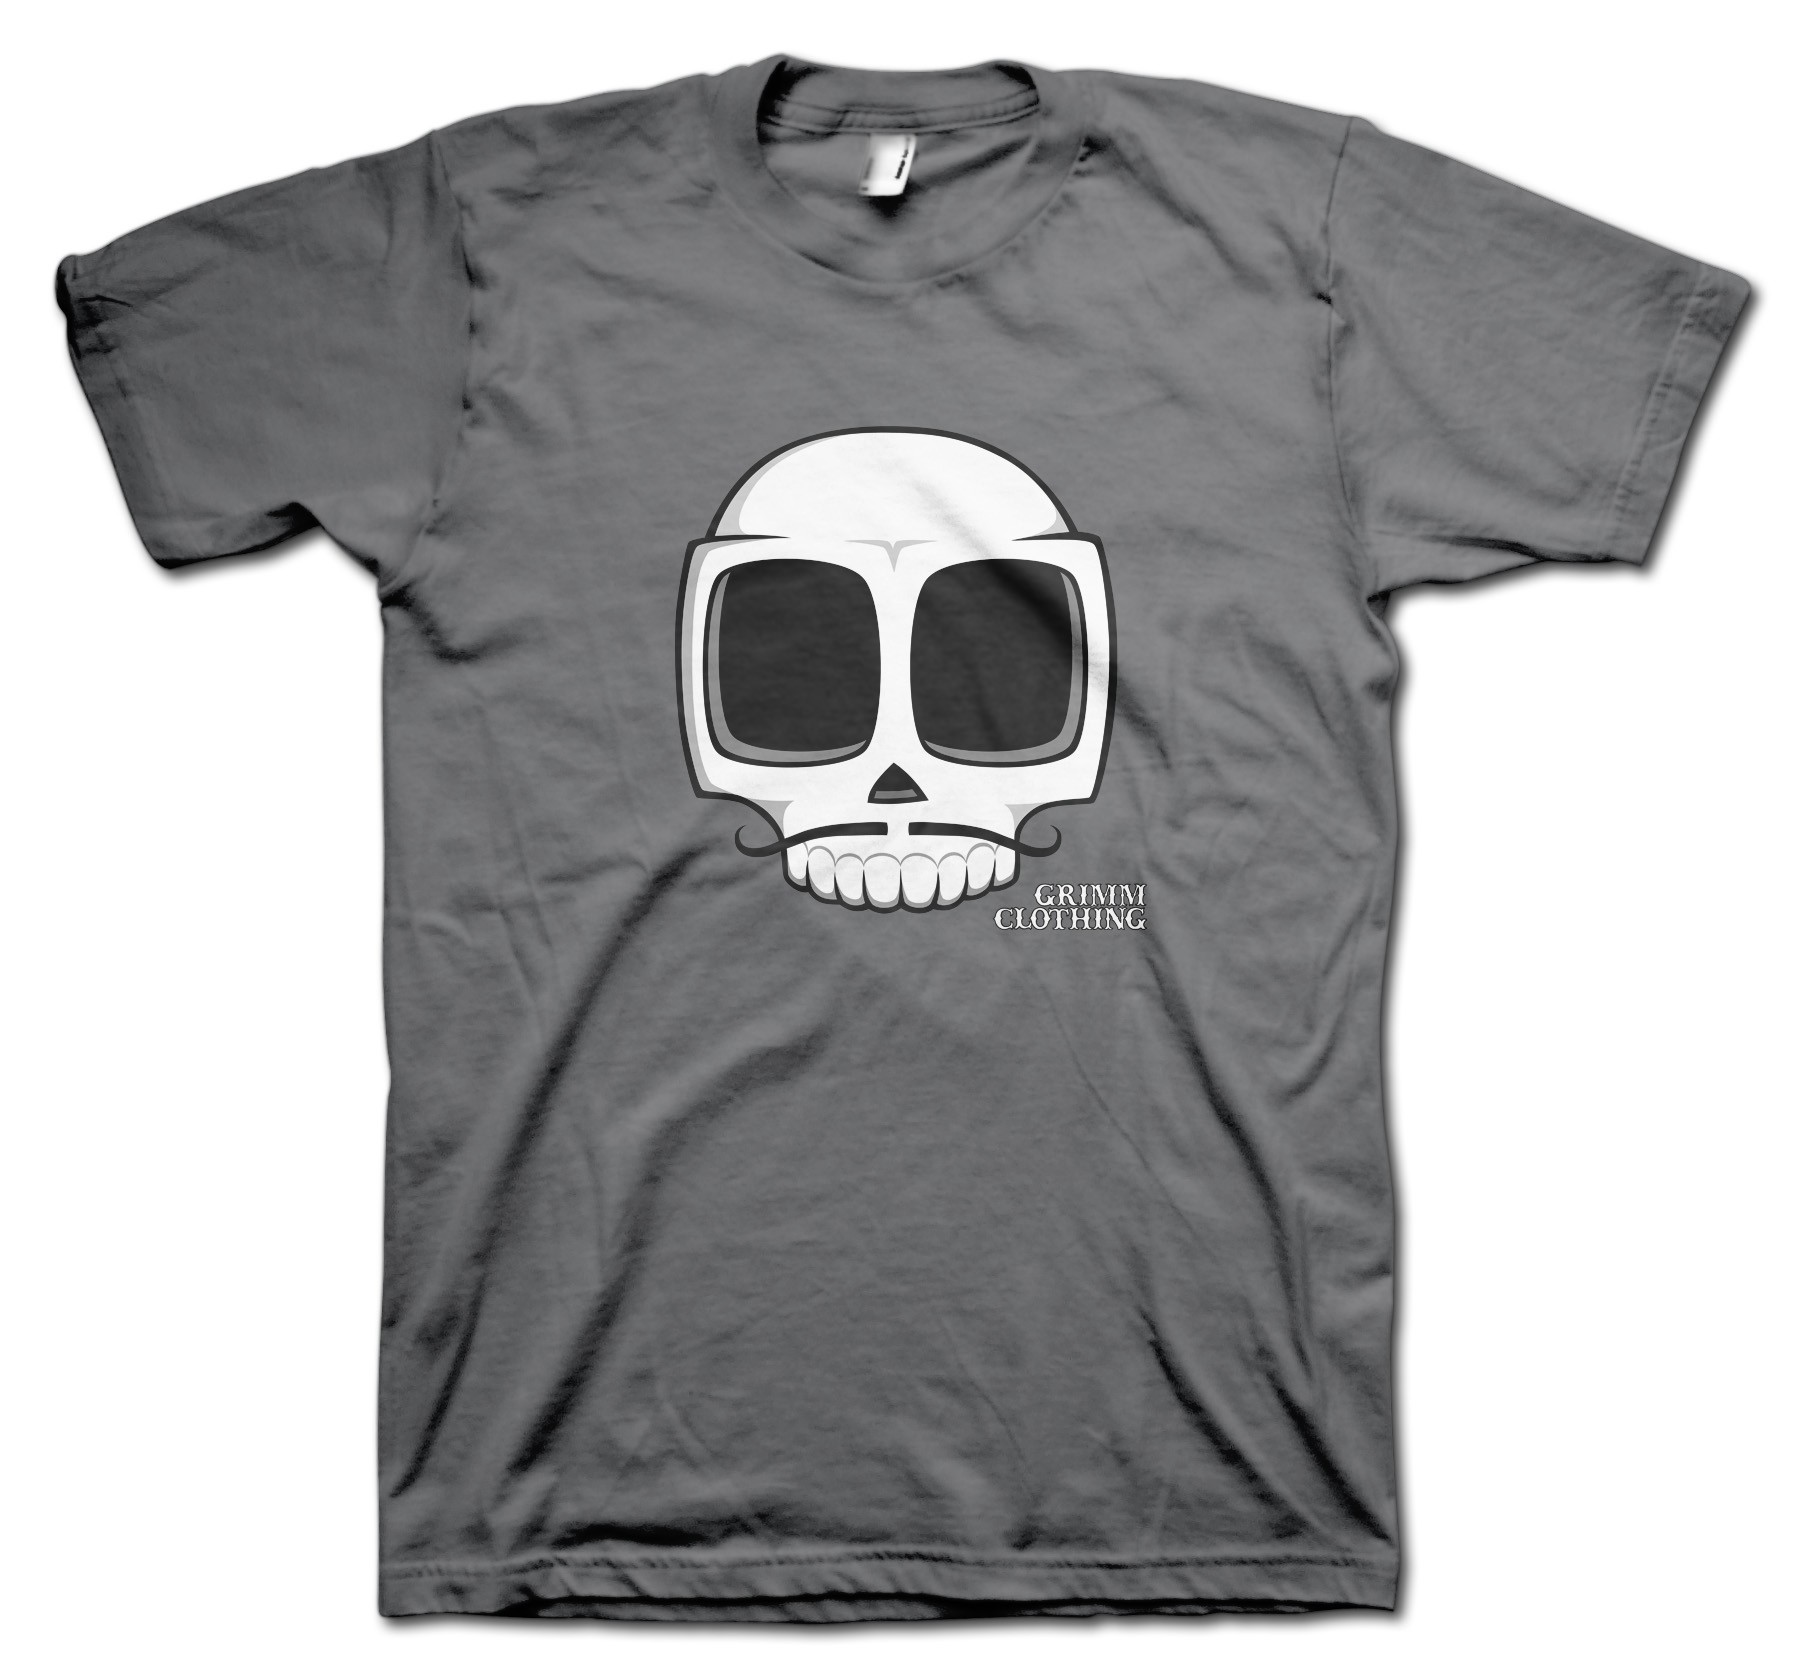 Carlos Classic T-Shirt by Grimm Clothing